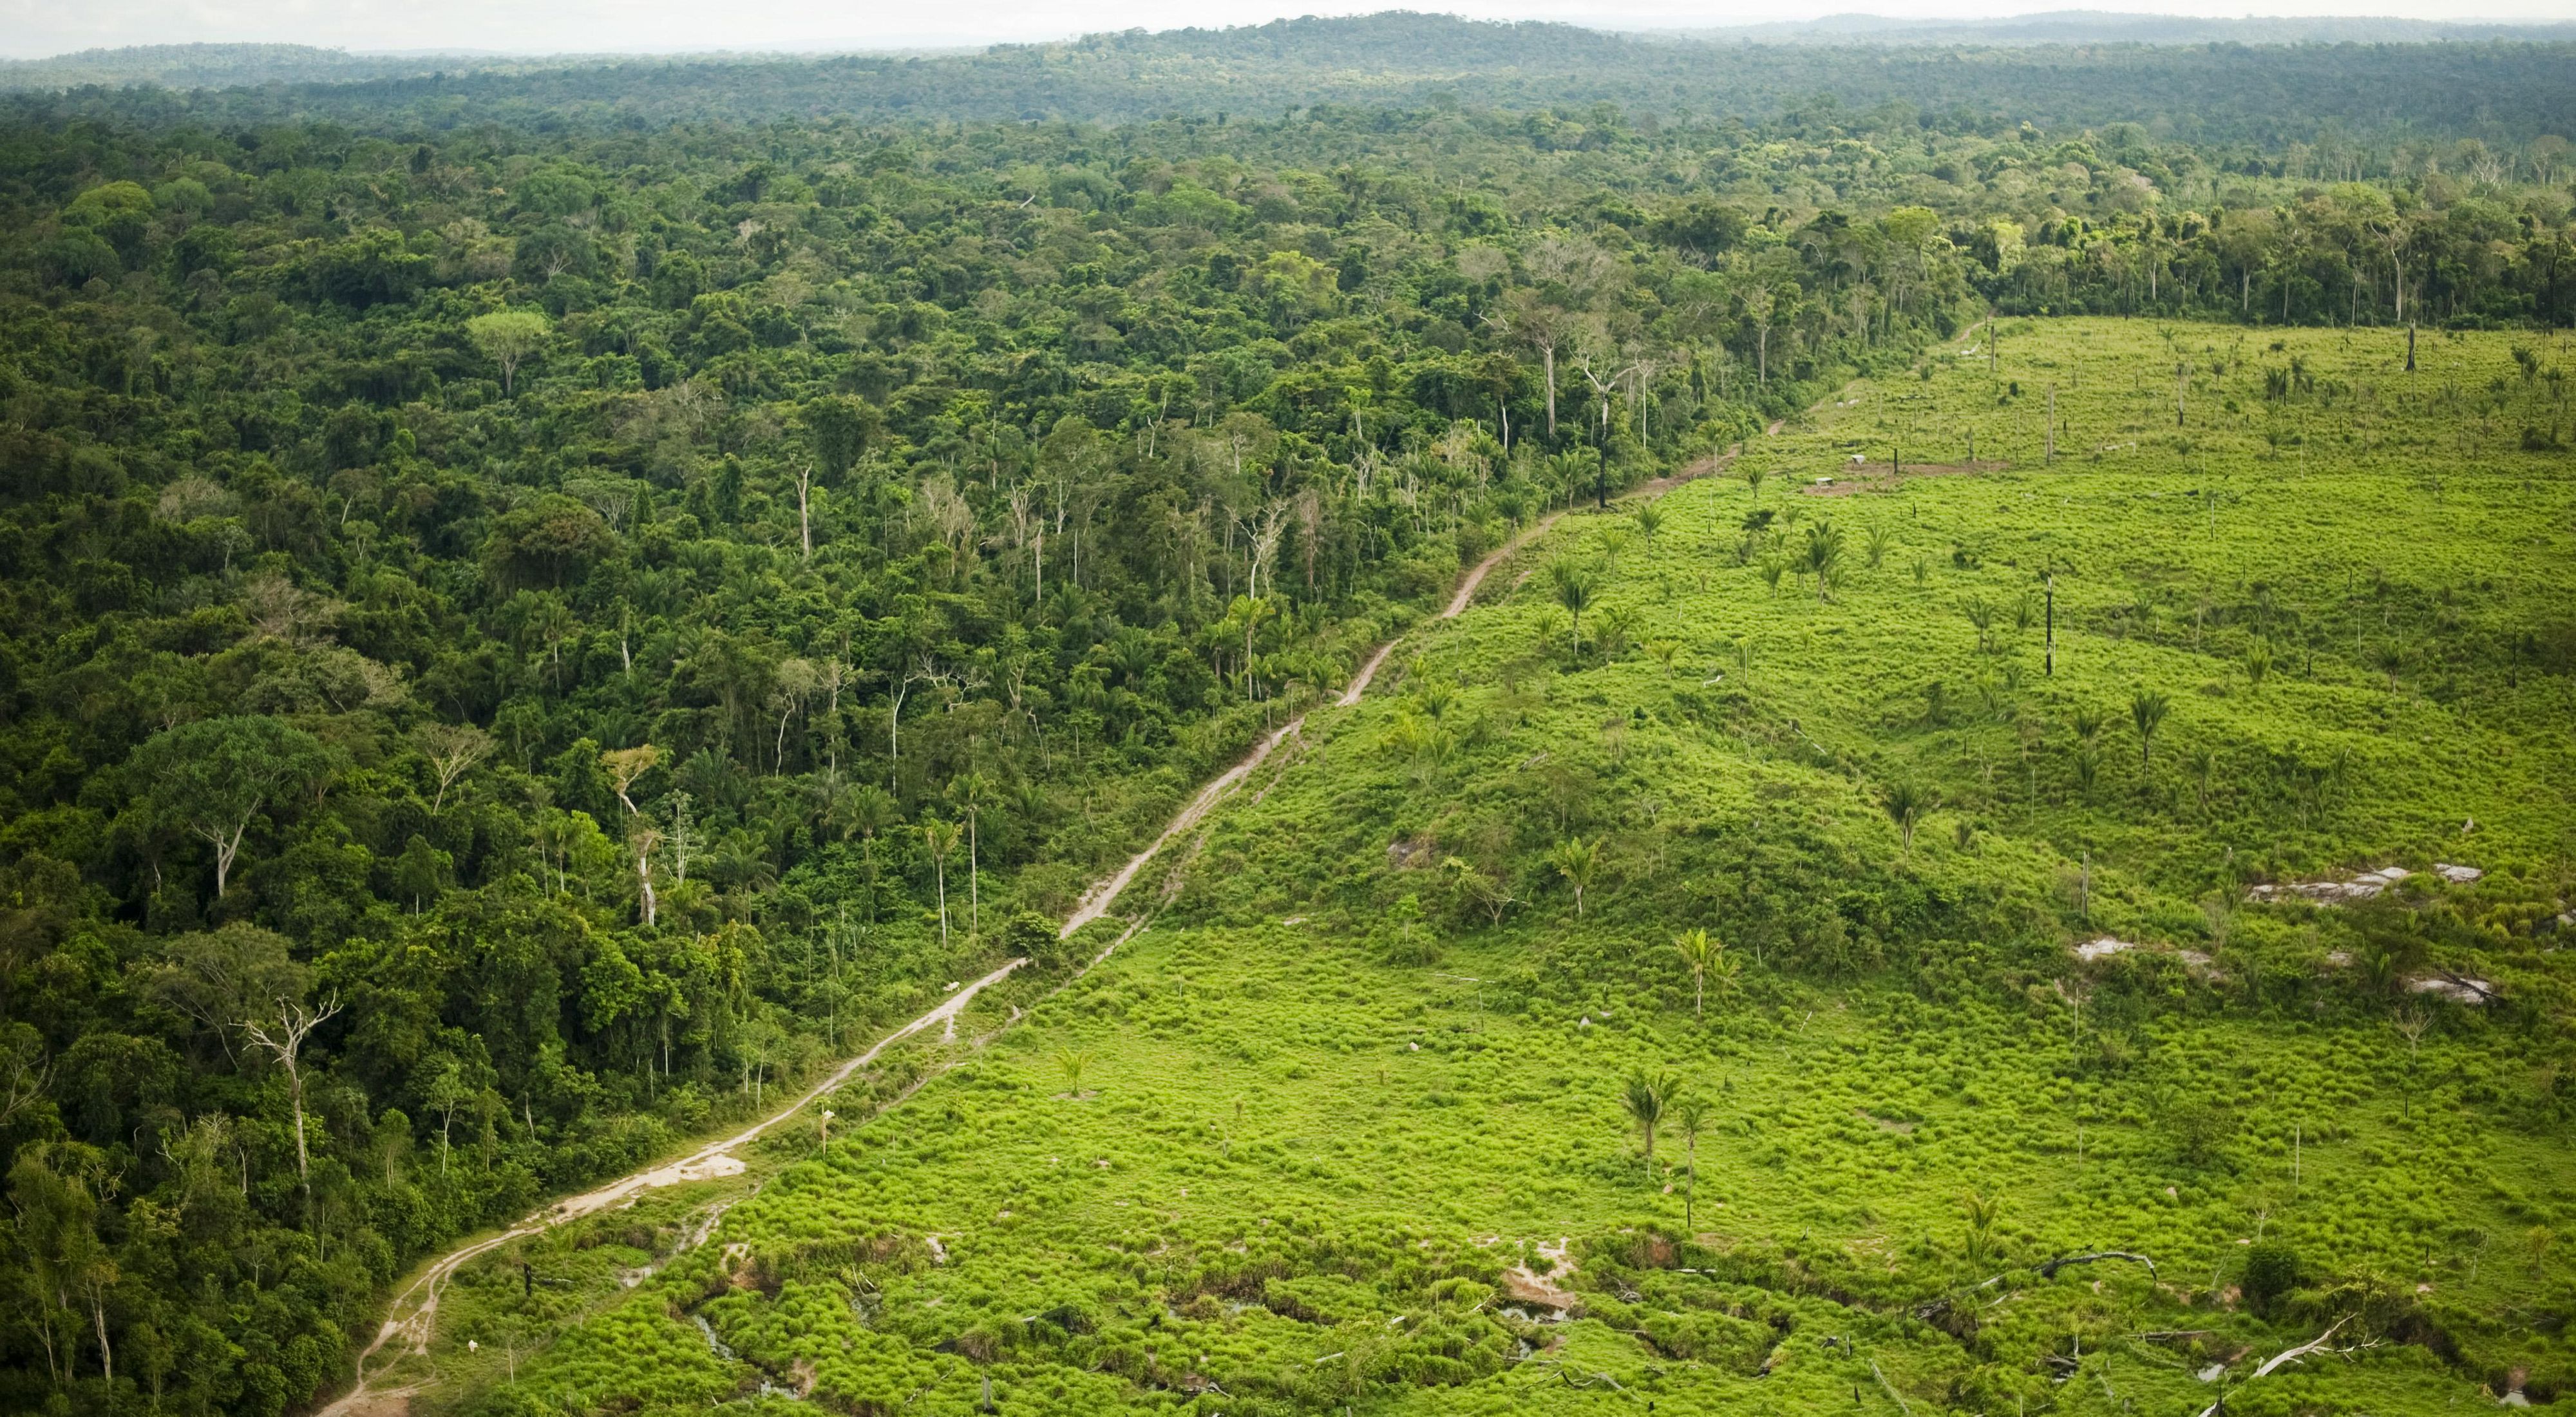 Aerial photo of deforestation in the Amazon of Brazil, showing one half of the photo with lush trees and the other side recently denuded to make way for agriculture.